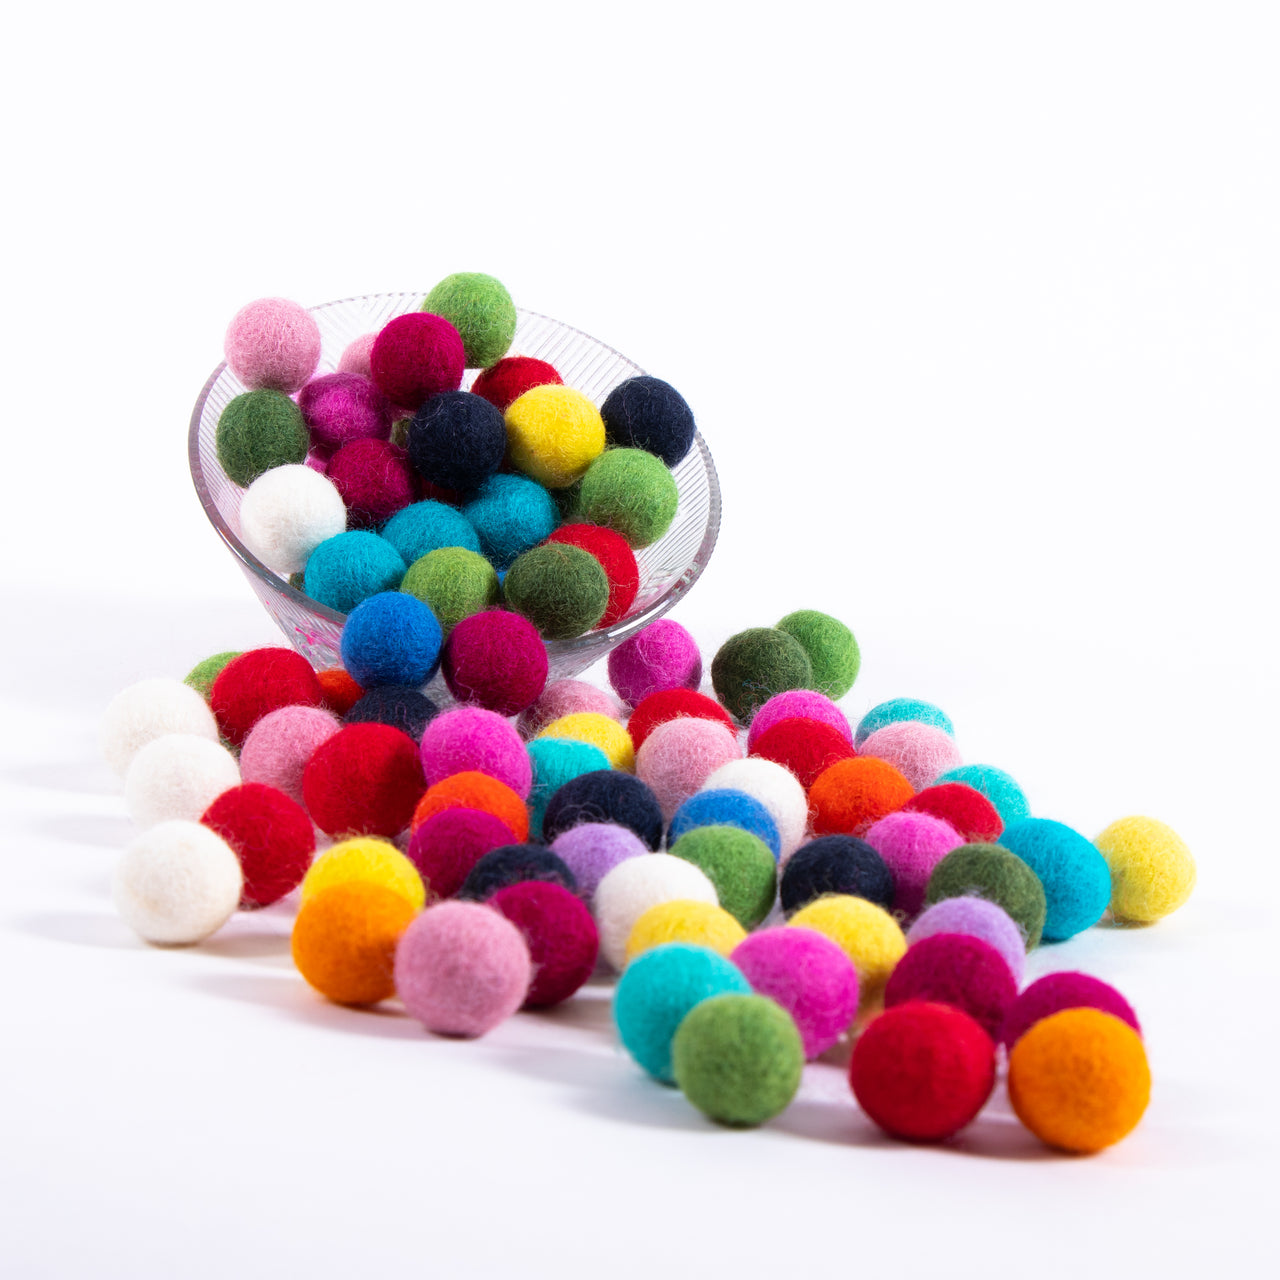 Luckforest Natural Wool Felt Balls Pom Poms, 30 Pcs 15 Colors for Crafts, Garland, Felting, Baby Mobile, and Decor 0.8 inch Nepalese 100% New